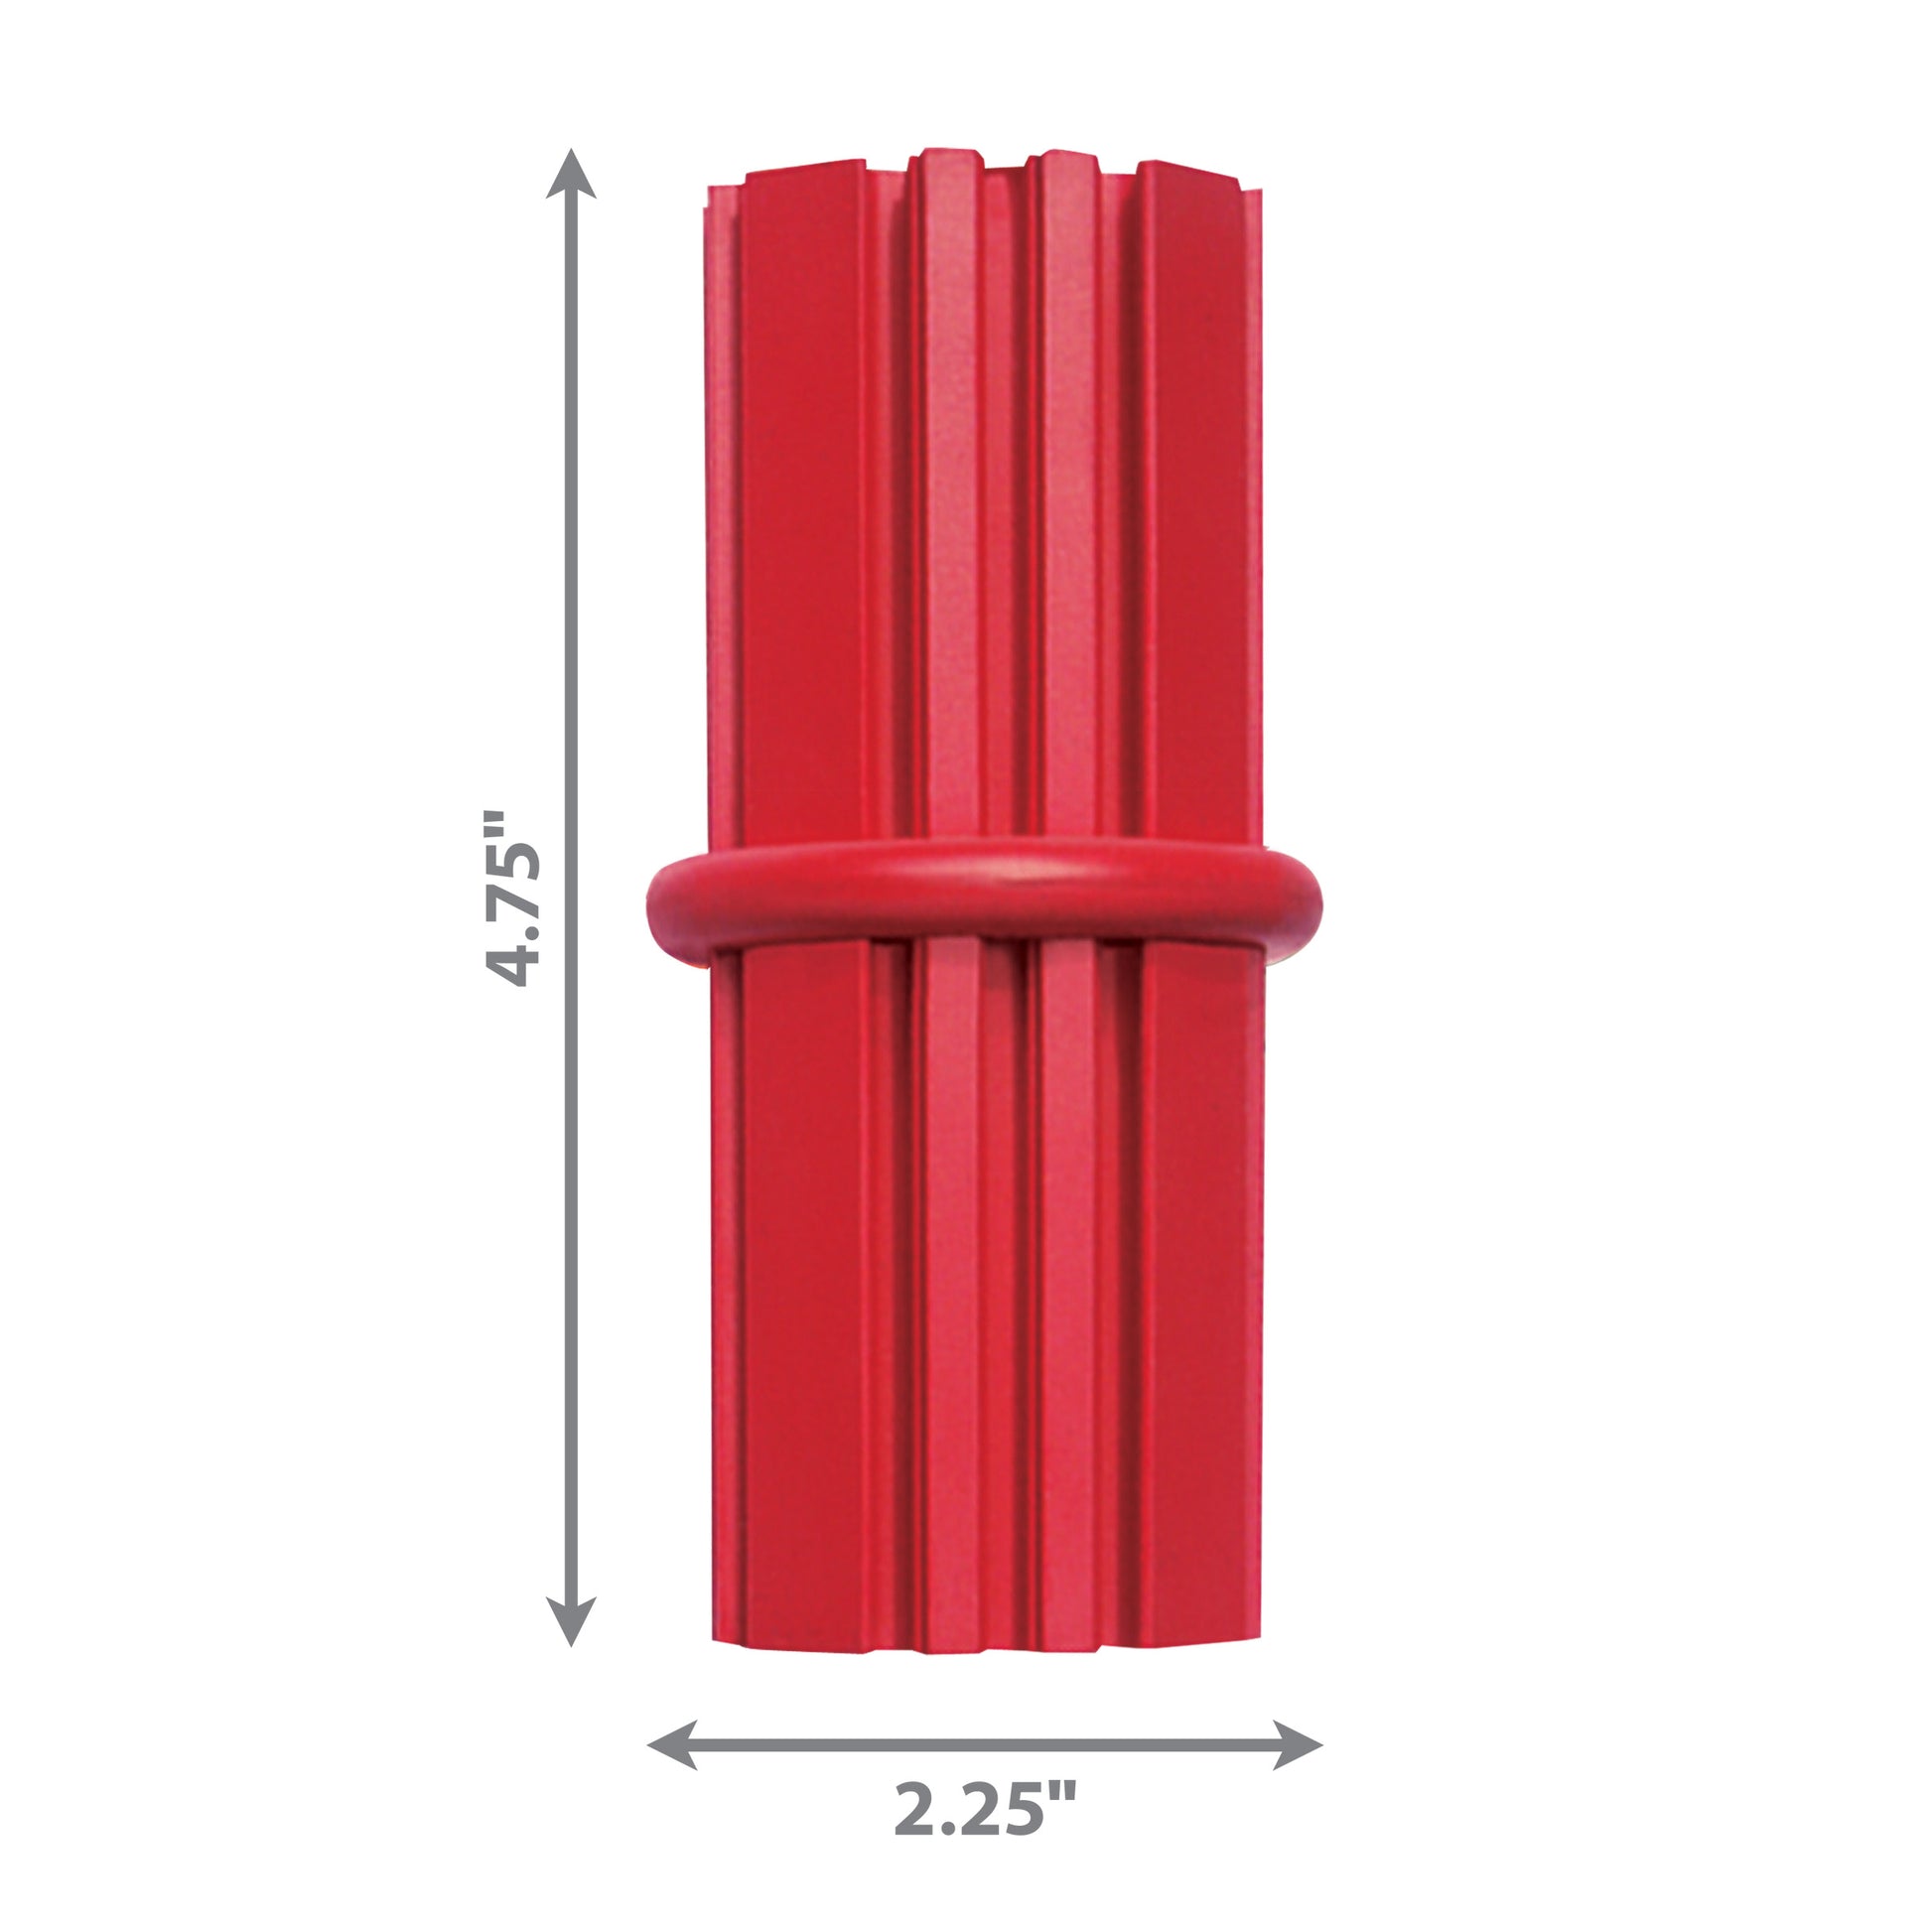 An image of a SALE: KONG Dental Stick with measurements, designed to promote dental health for gums and teeth by Your Whole Dog.